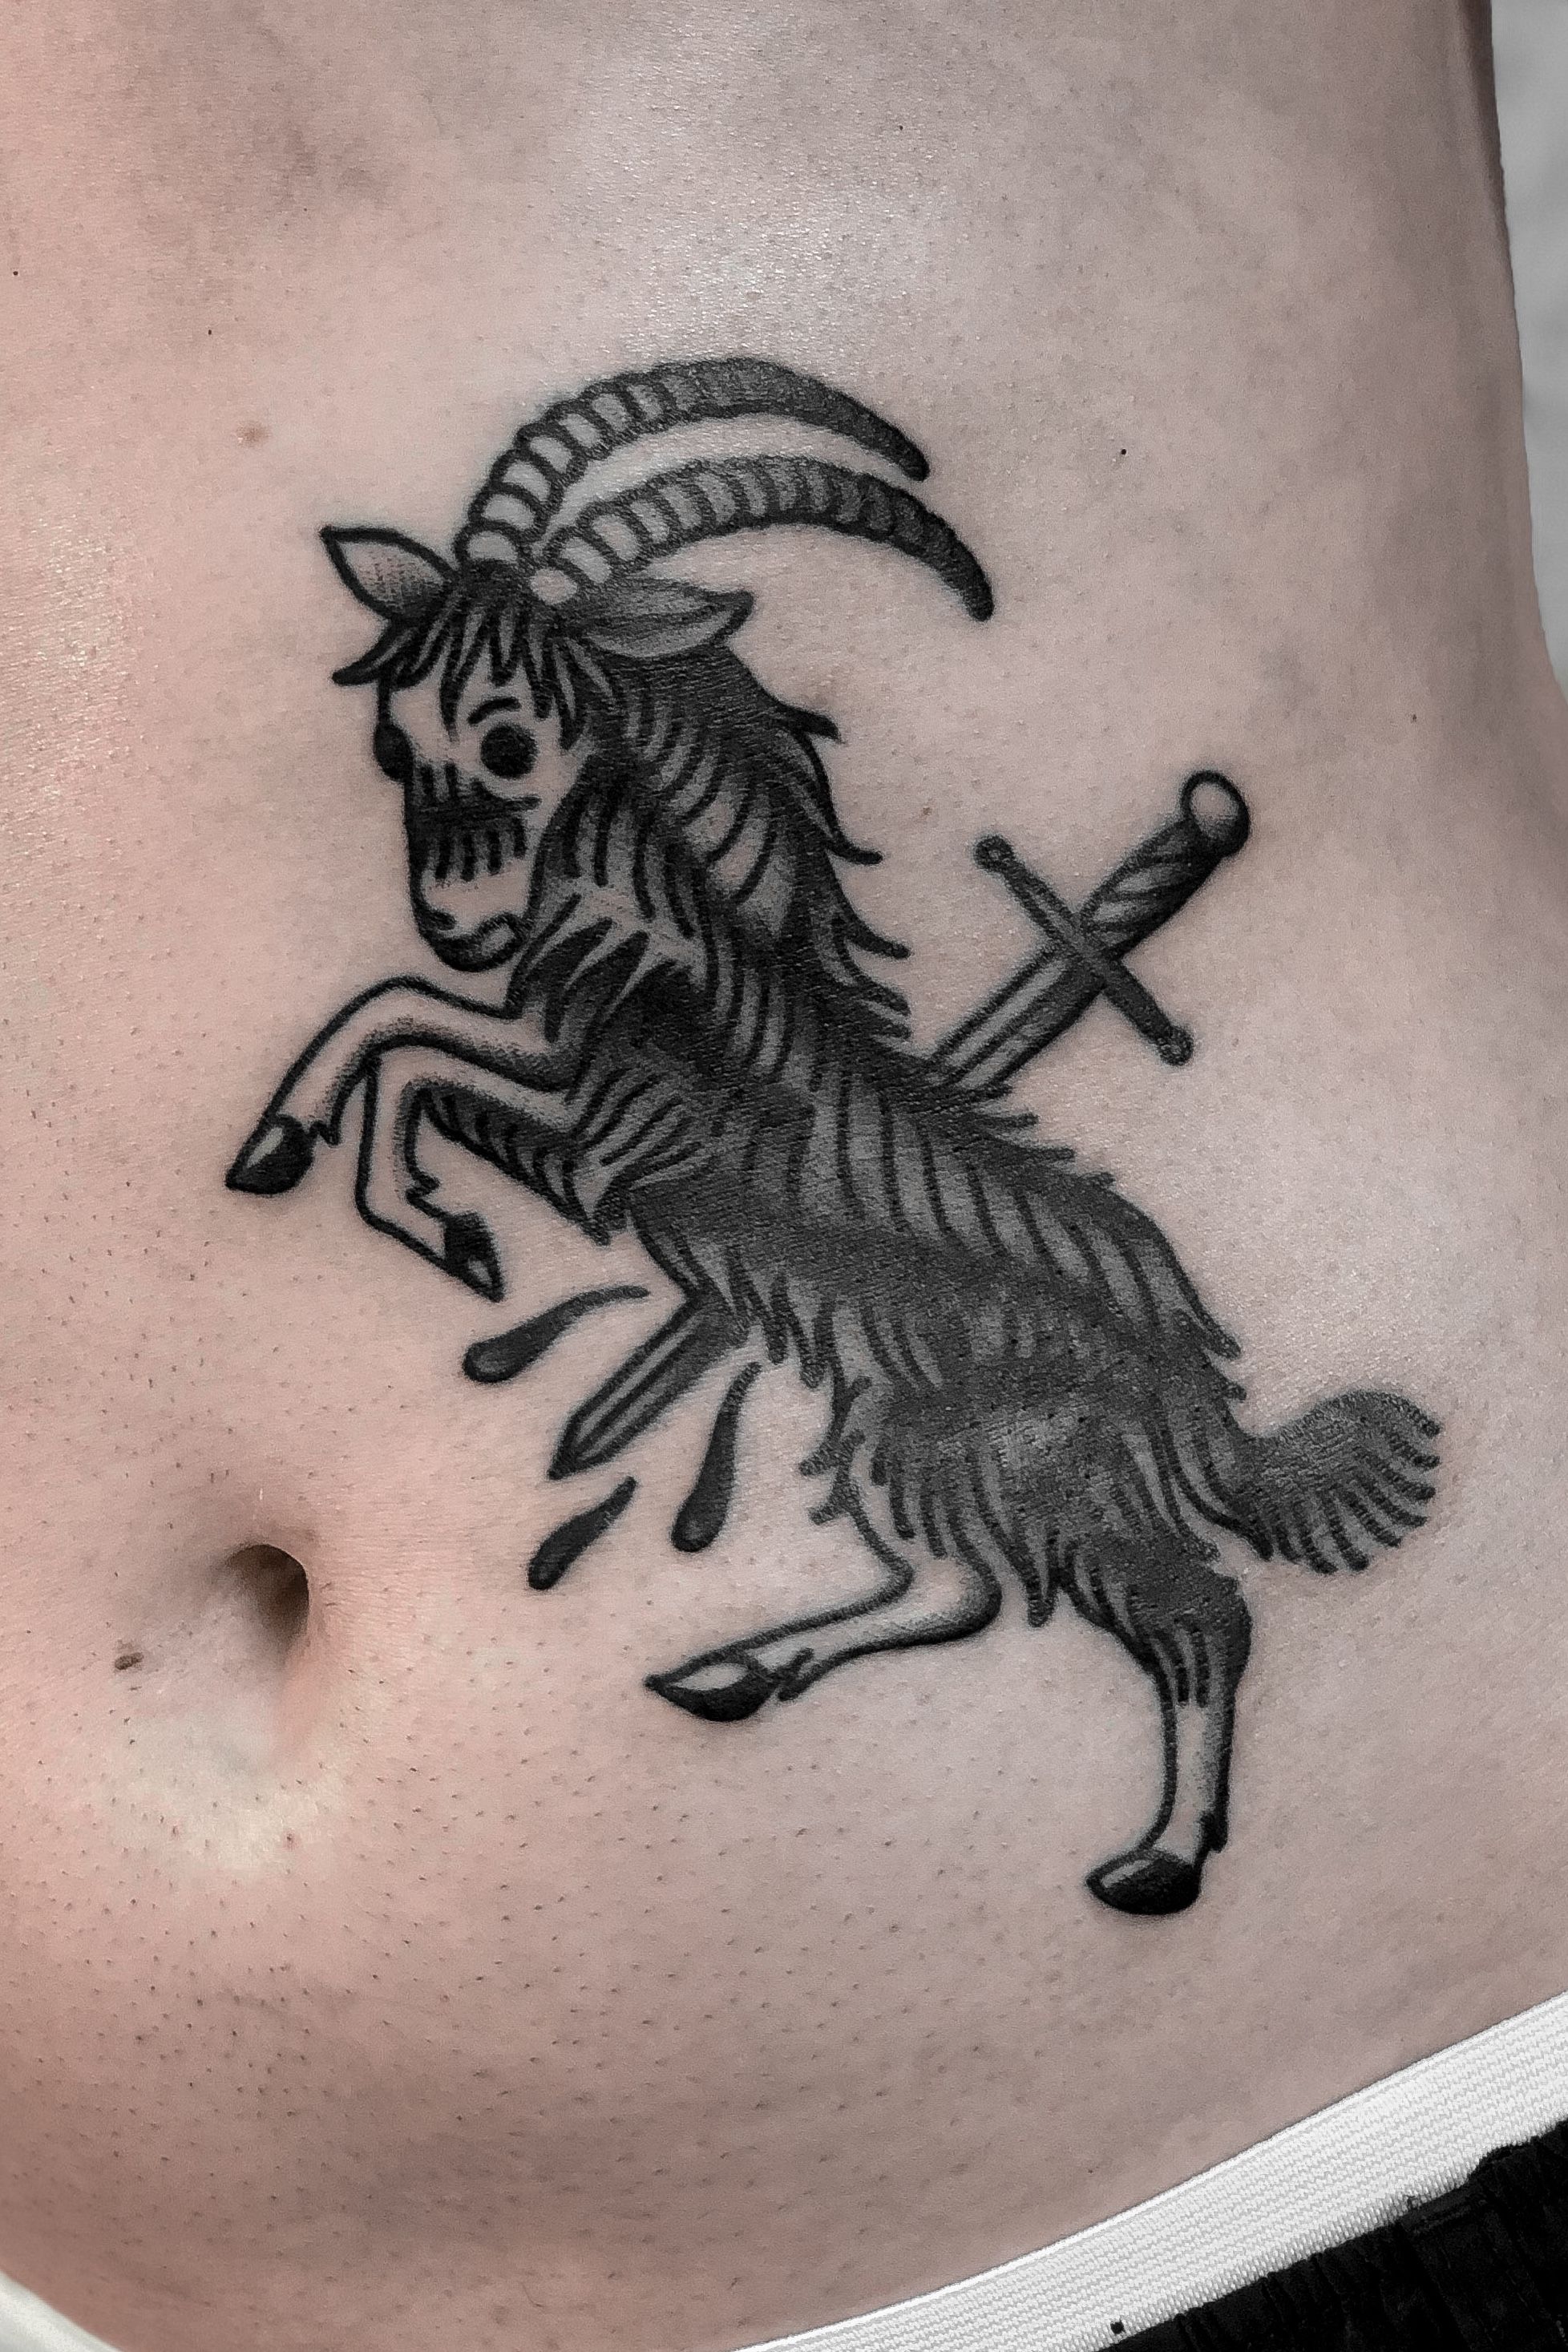 100 Goat Tattoo Designs For Men  Ink Ideas With Horns  Animal tattoos for  men Tattoo designs men Skull tattoos